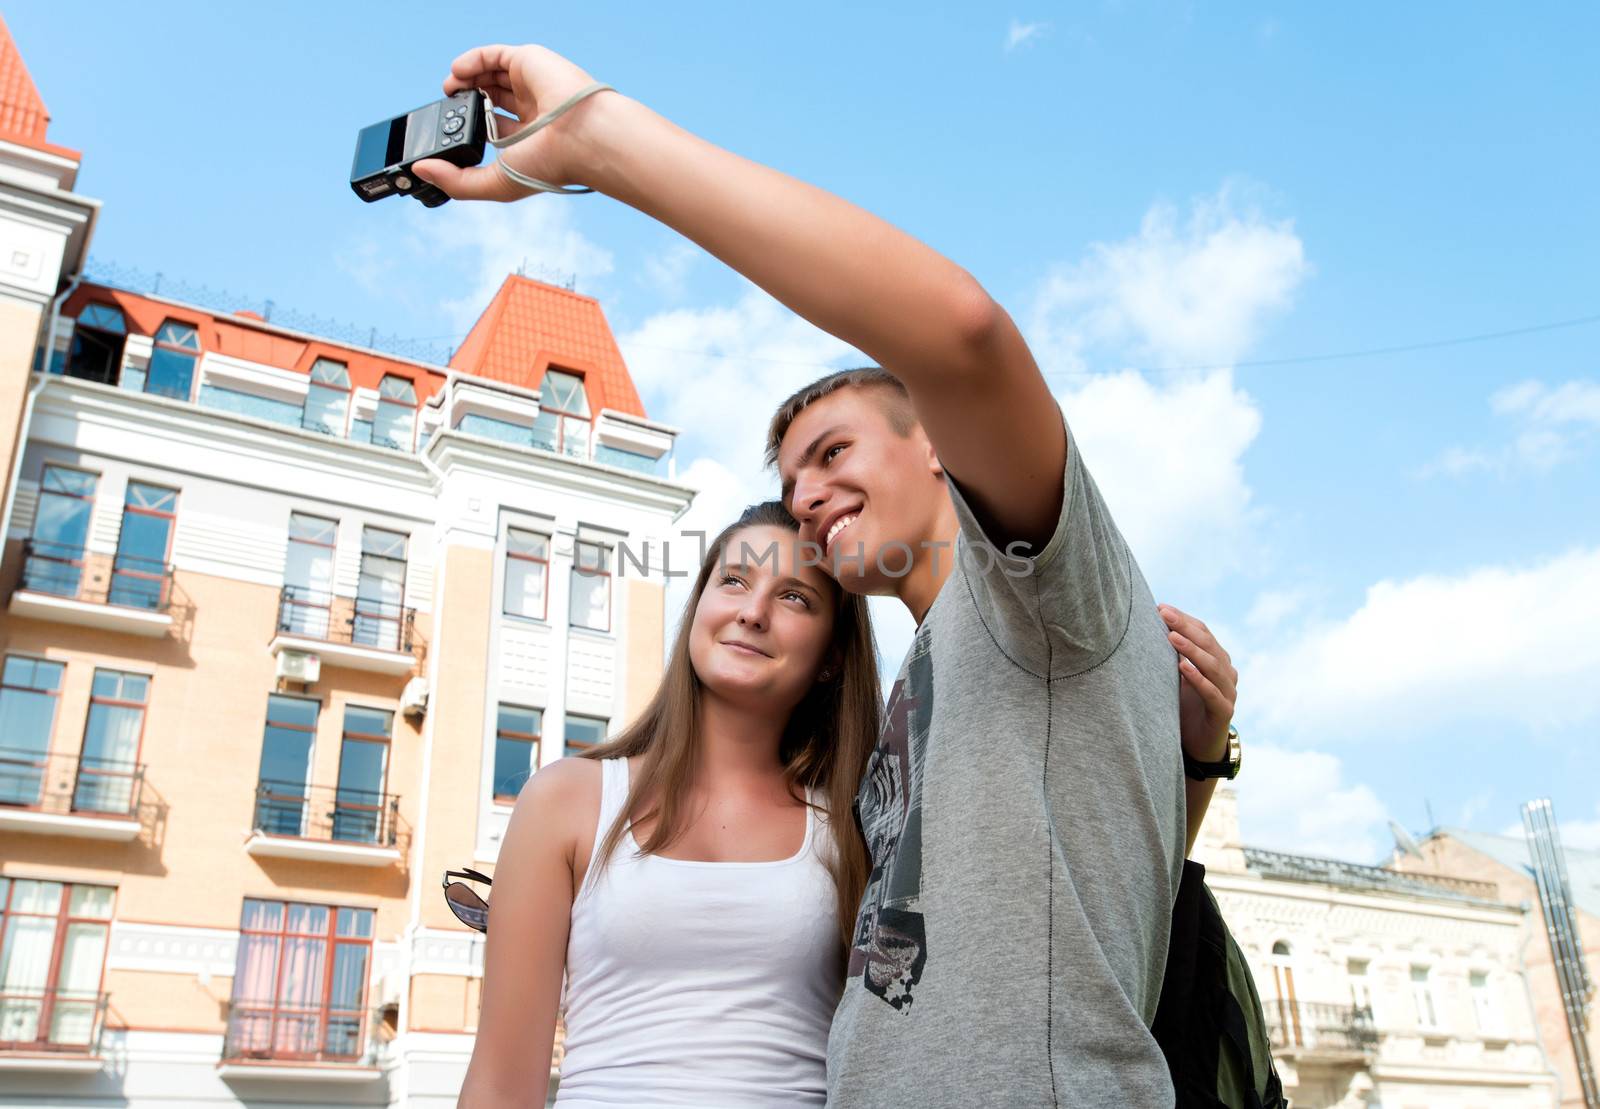 Couple take a picture together, smiling and having fun